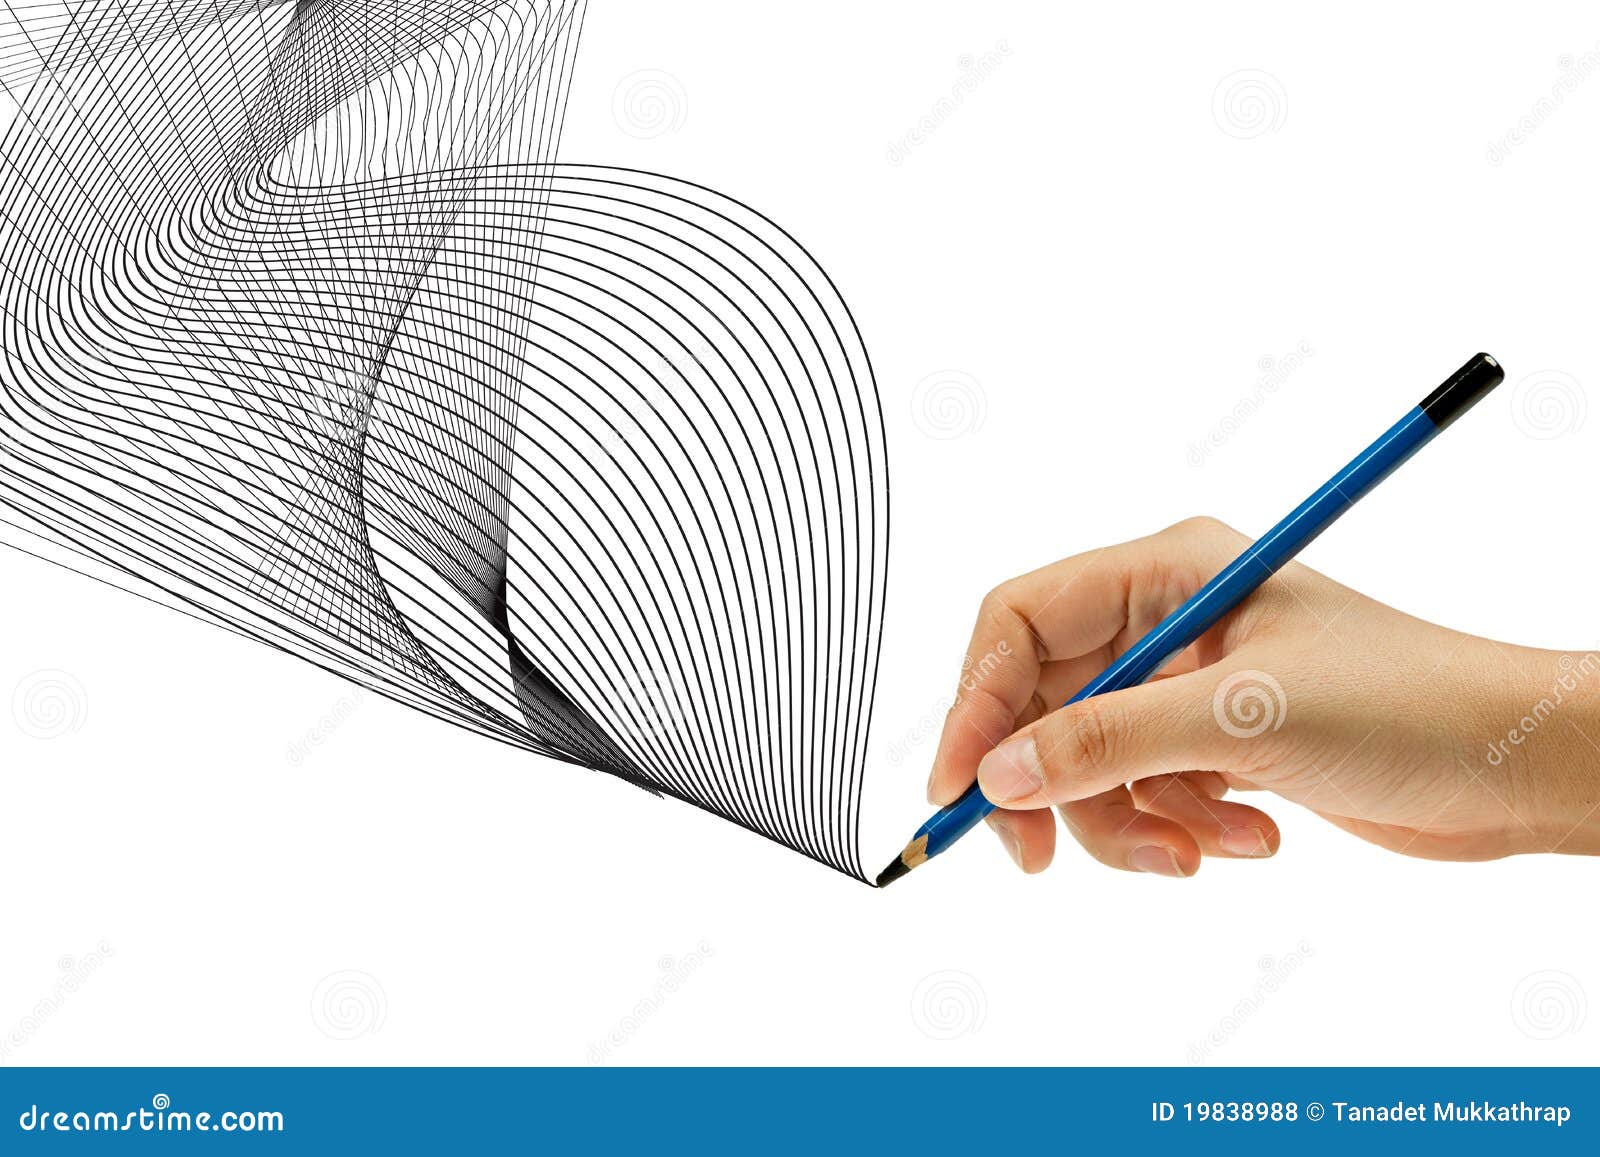 Drawing With Pencil In Hand Royalty Free Stock Photos - Image: 19838988